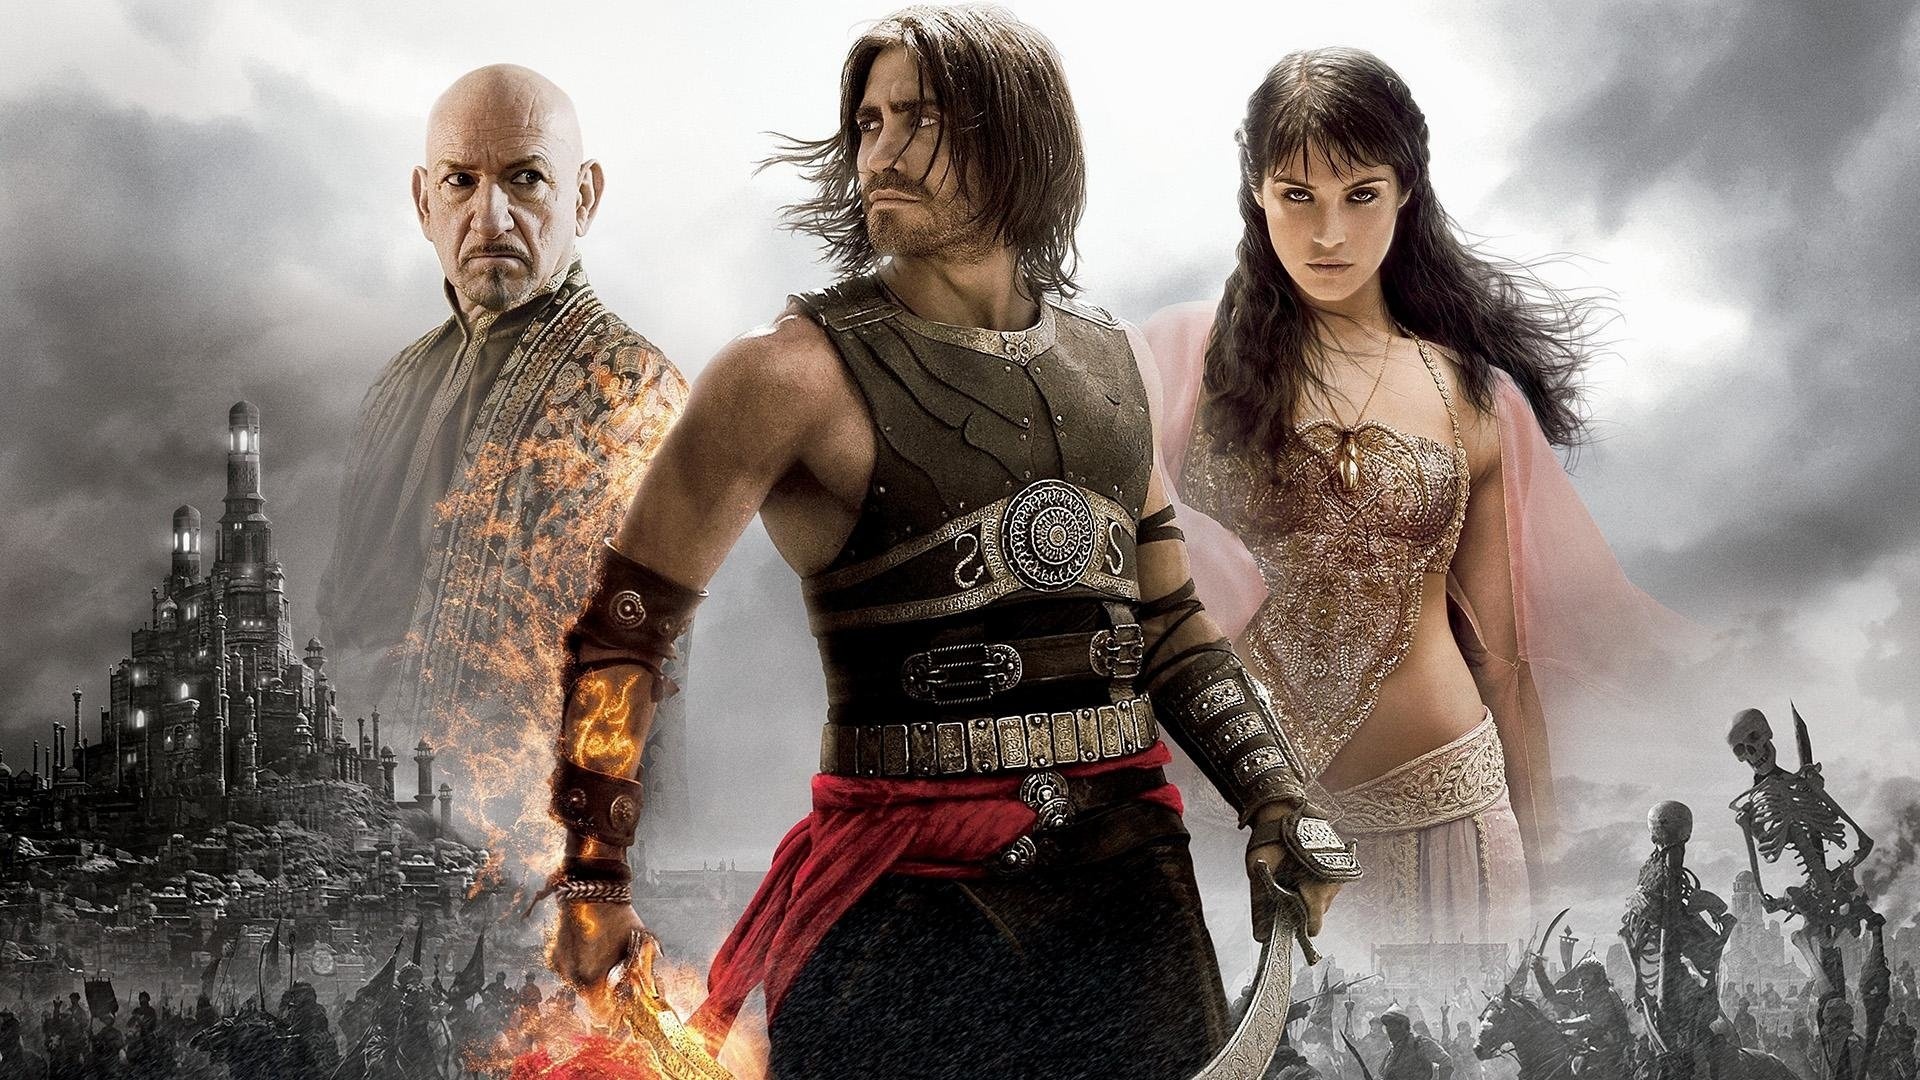 Prince of Persia (Movie): A live-action adaptation based on the 2003 video game of the same name developed by Ubisoft Montreal. 1920x1080 Full HD Background.